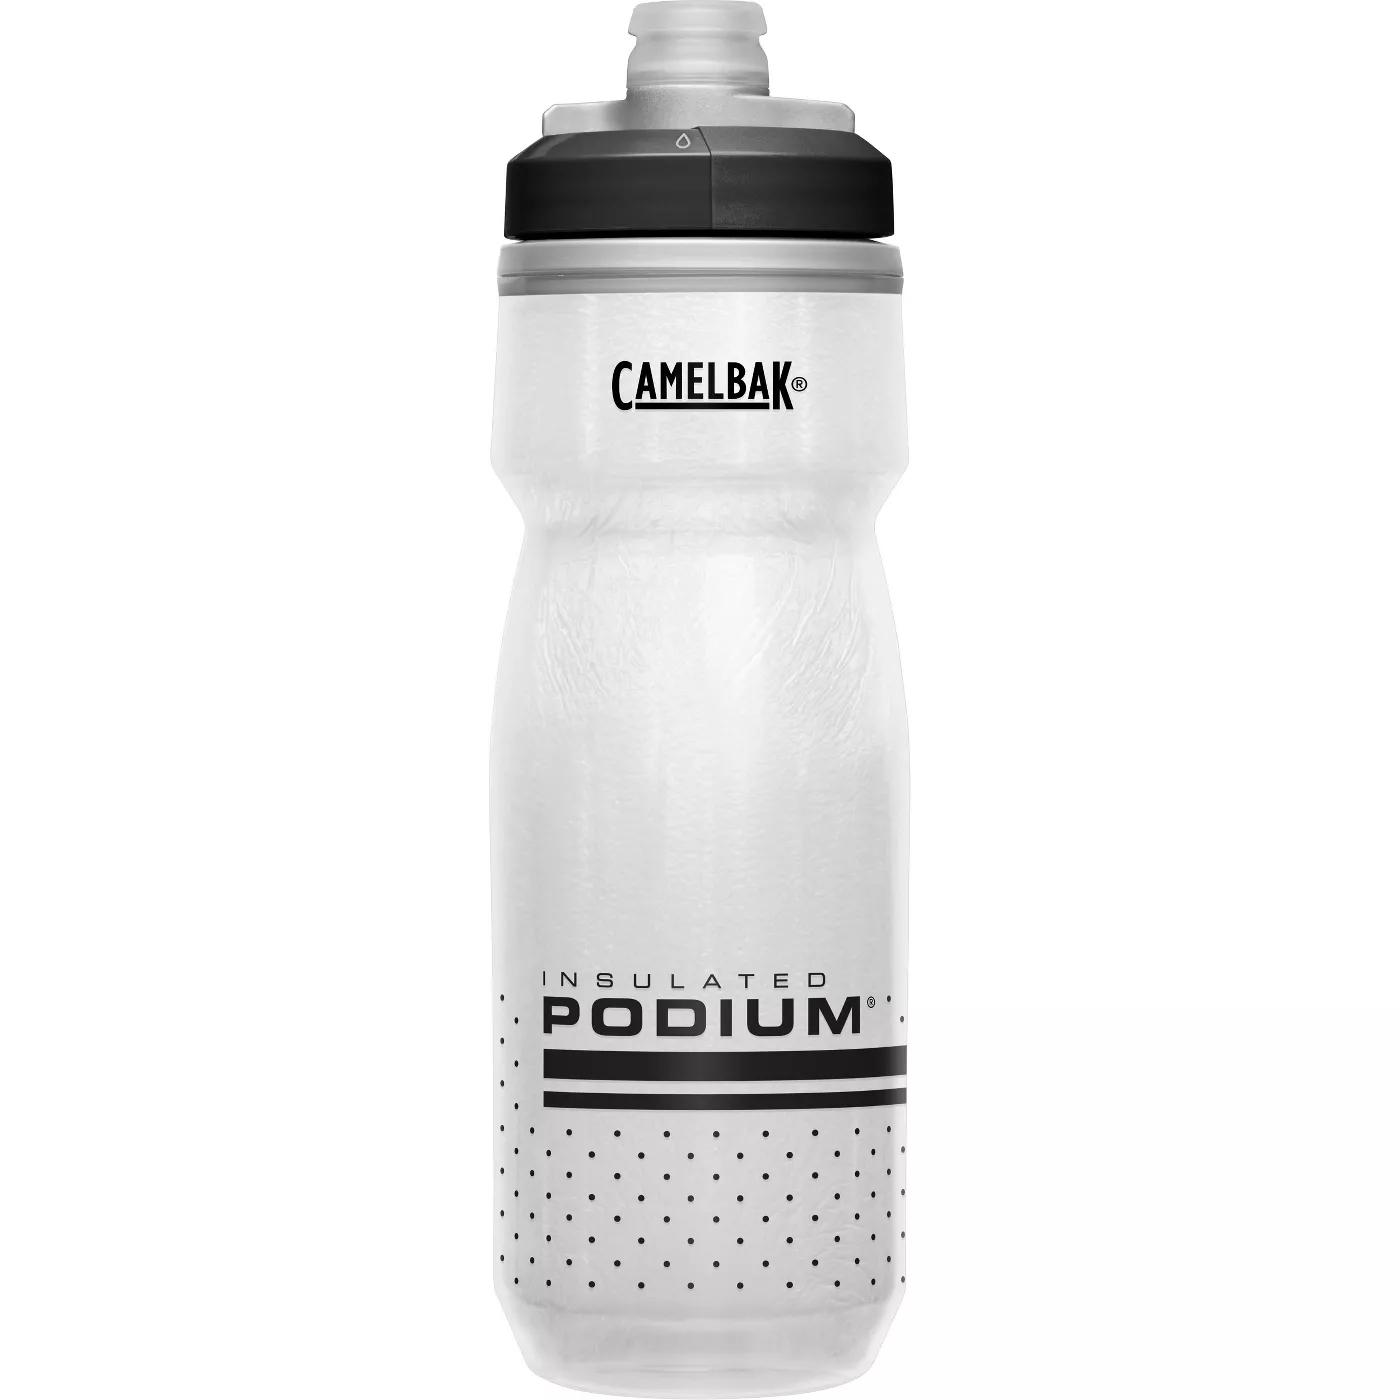 CamelBak 21oz Podium Chill Insulated Squeeze Water Bottle for $6.15